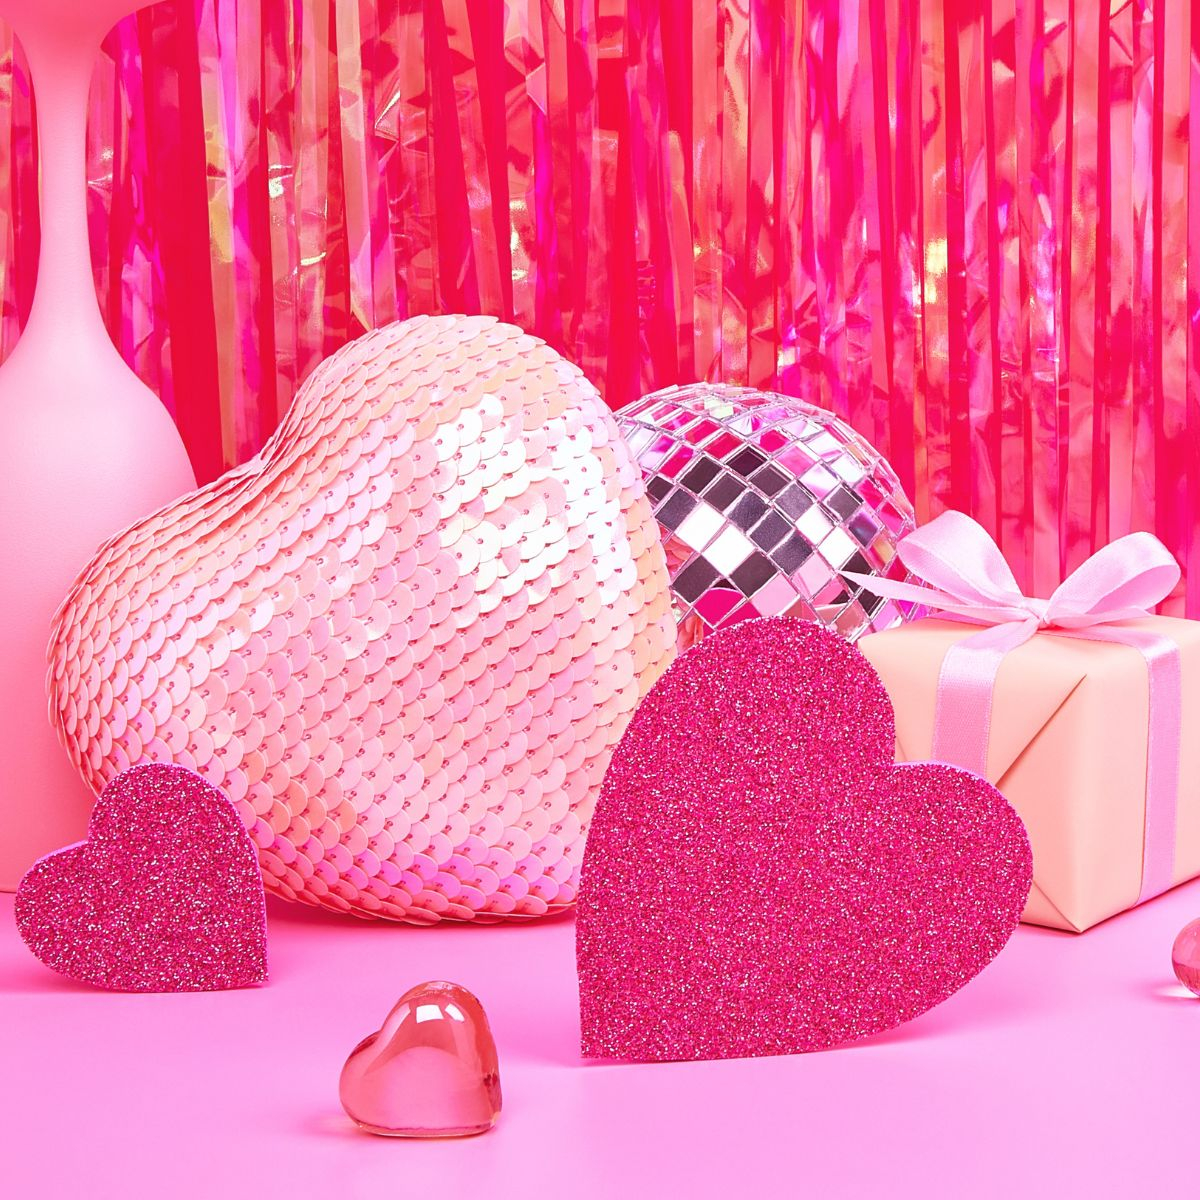 The 30 Best Galentine's Day Gifts on